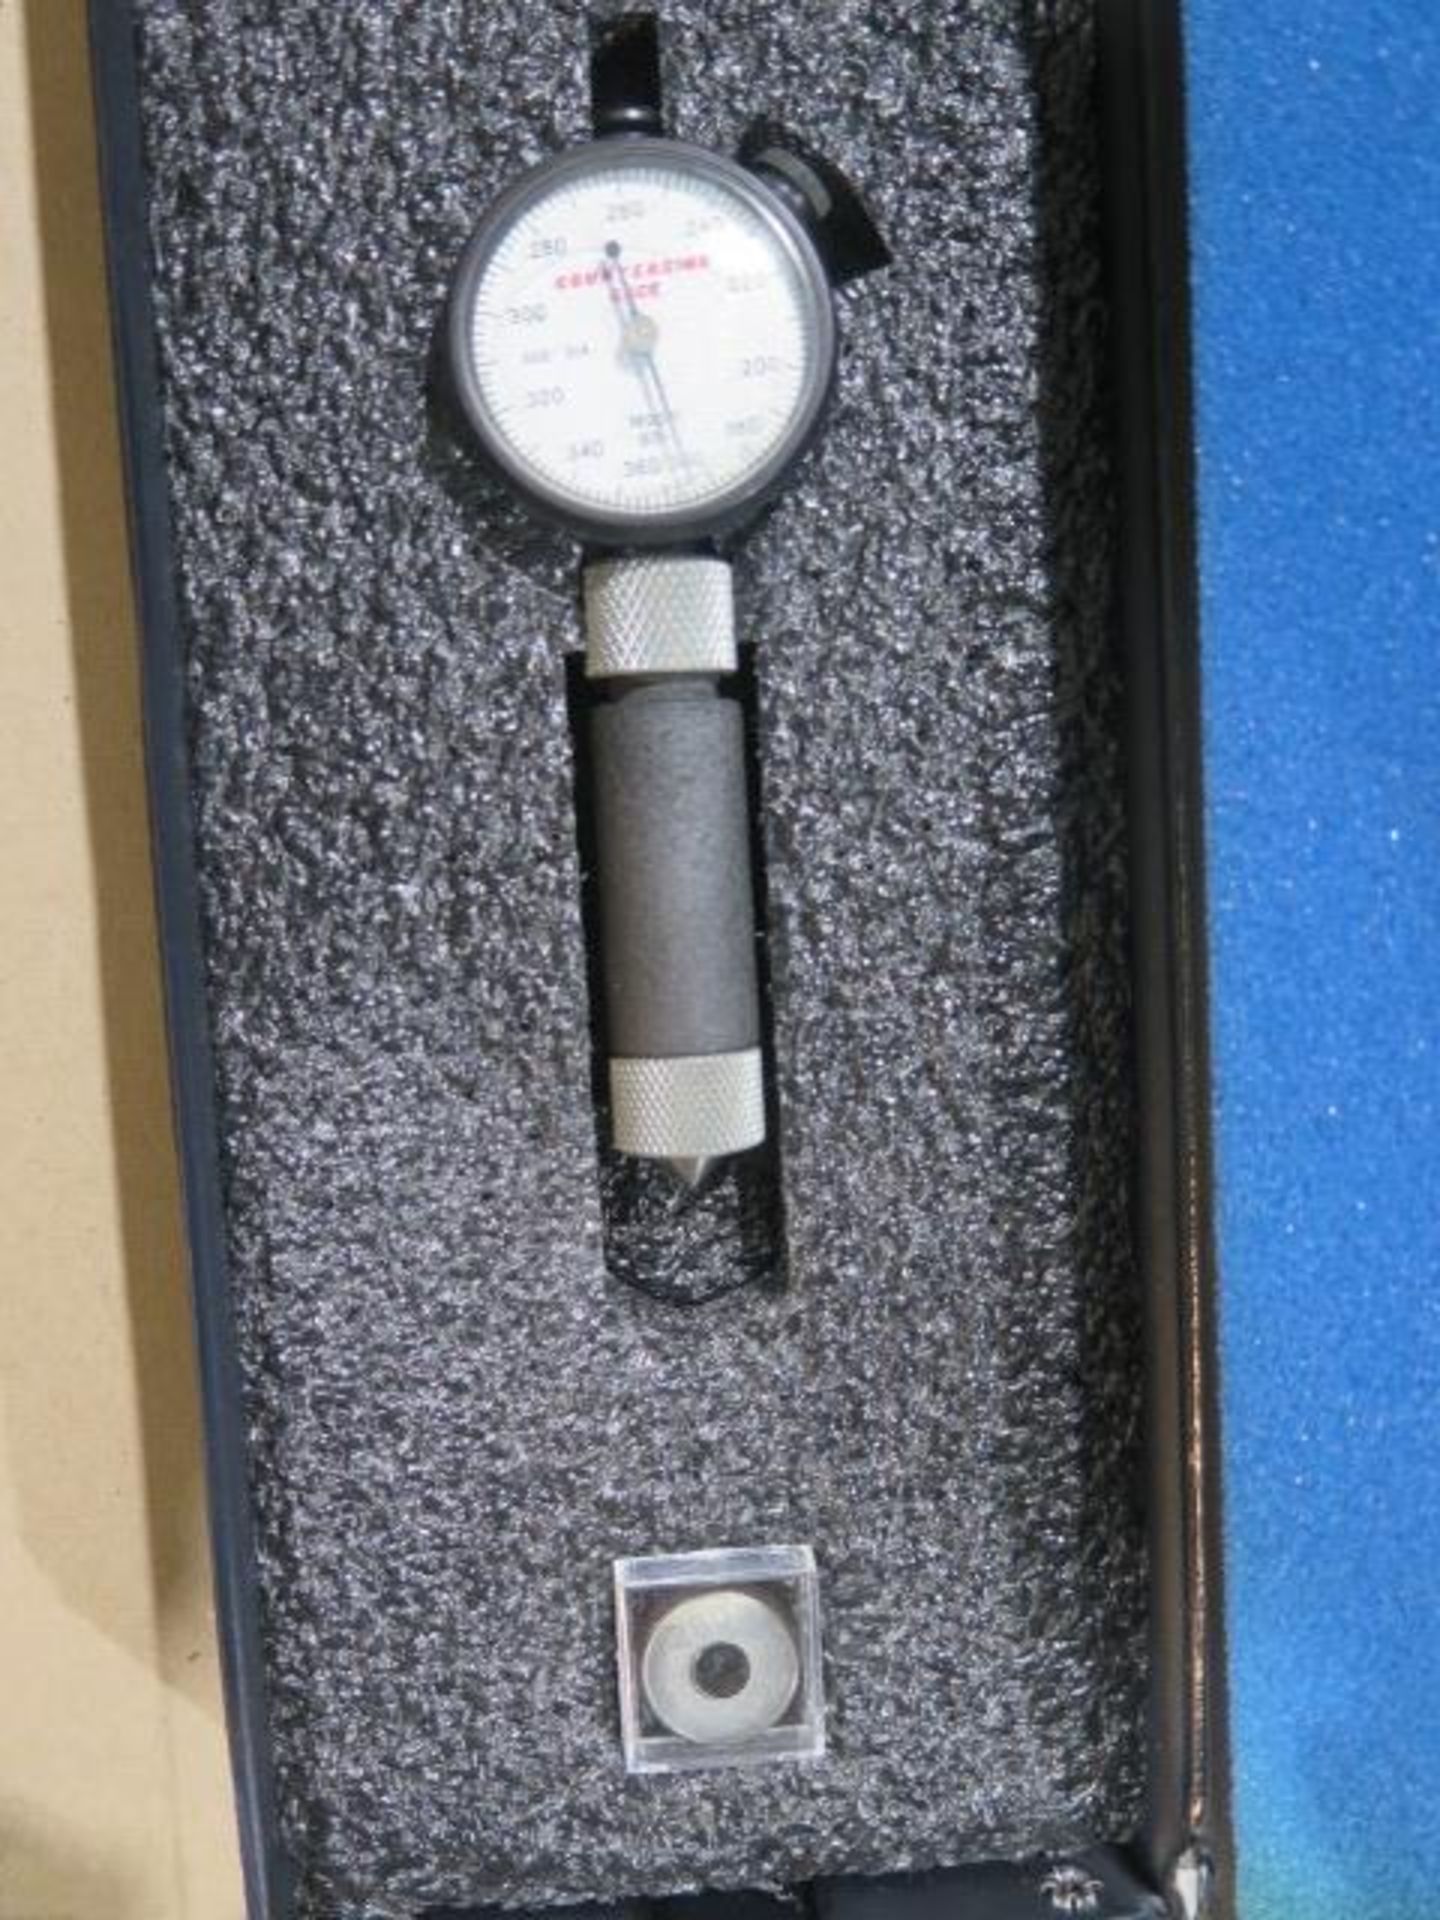 Barcor Dial Chamfer Gages (2) (SOLD AS-IS - NO WARRANTY) - Image 2 of 5